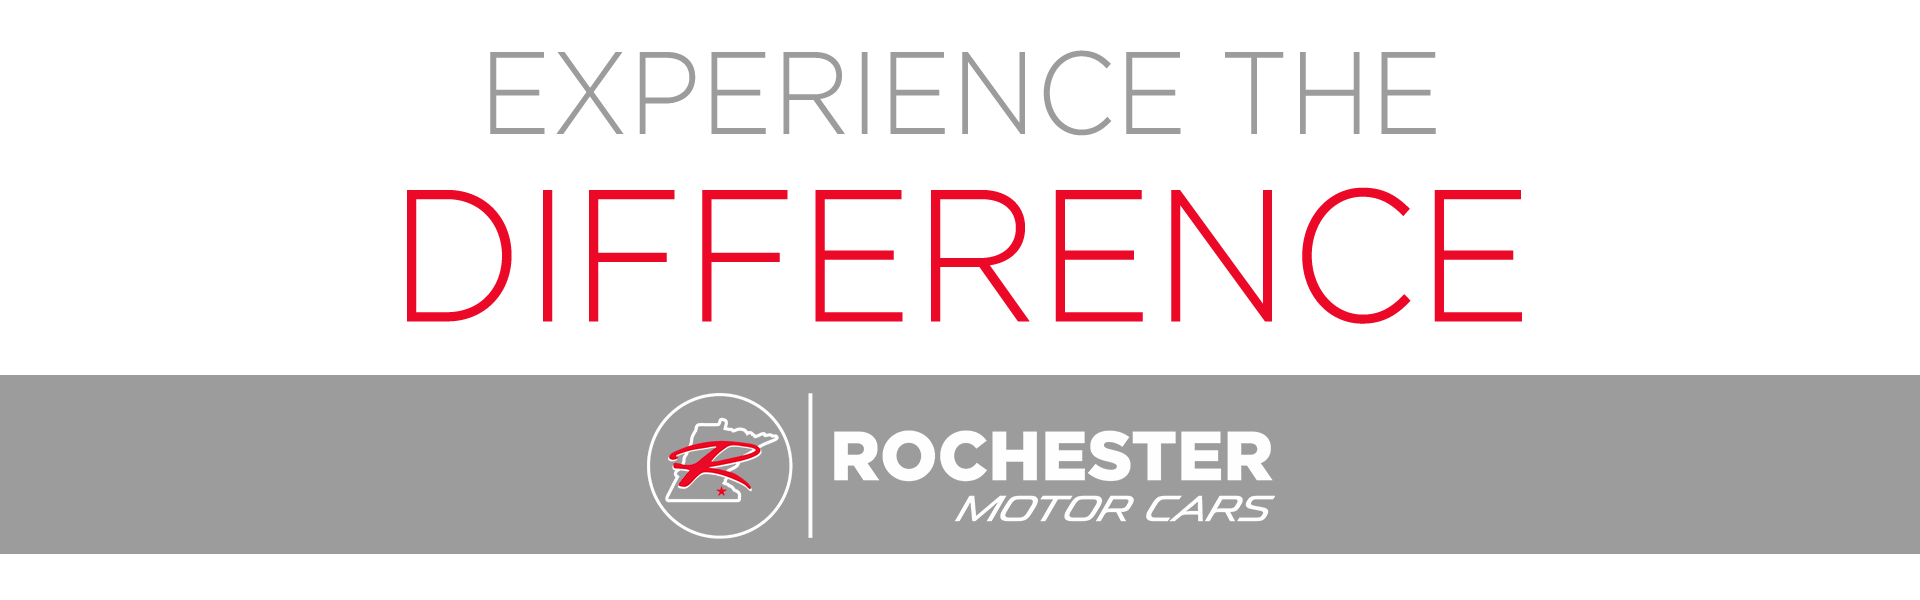 Experience the Difference at Rochester Chevrolet in Rochester MN